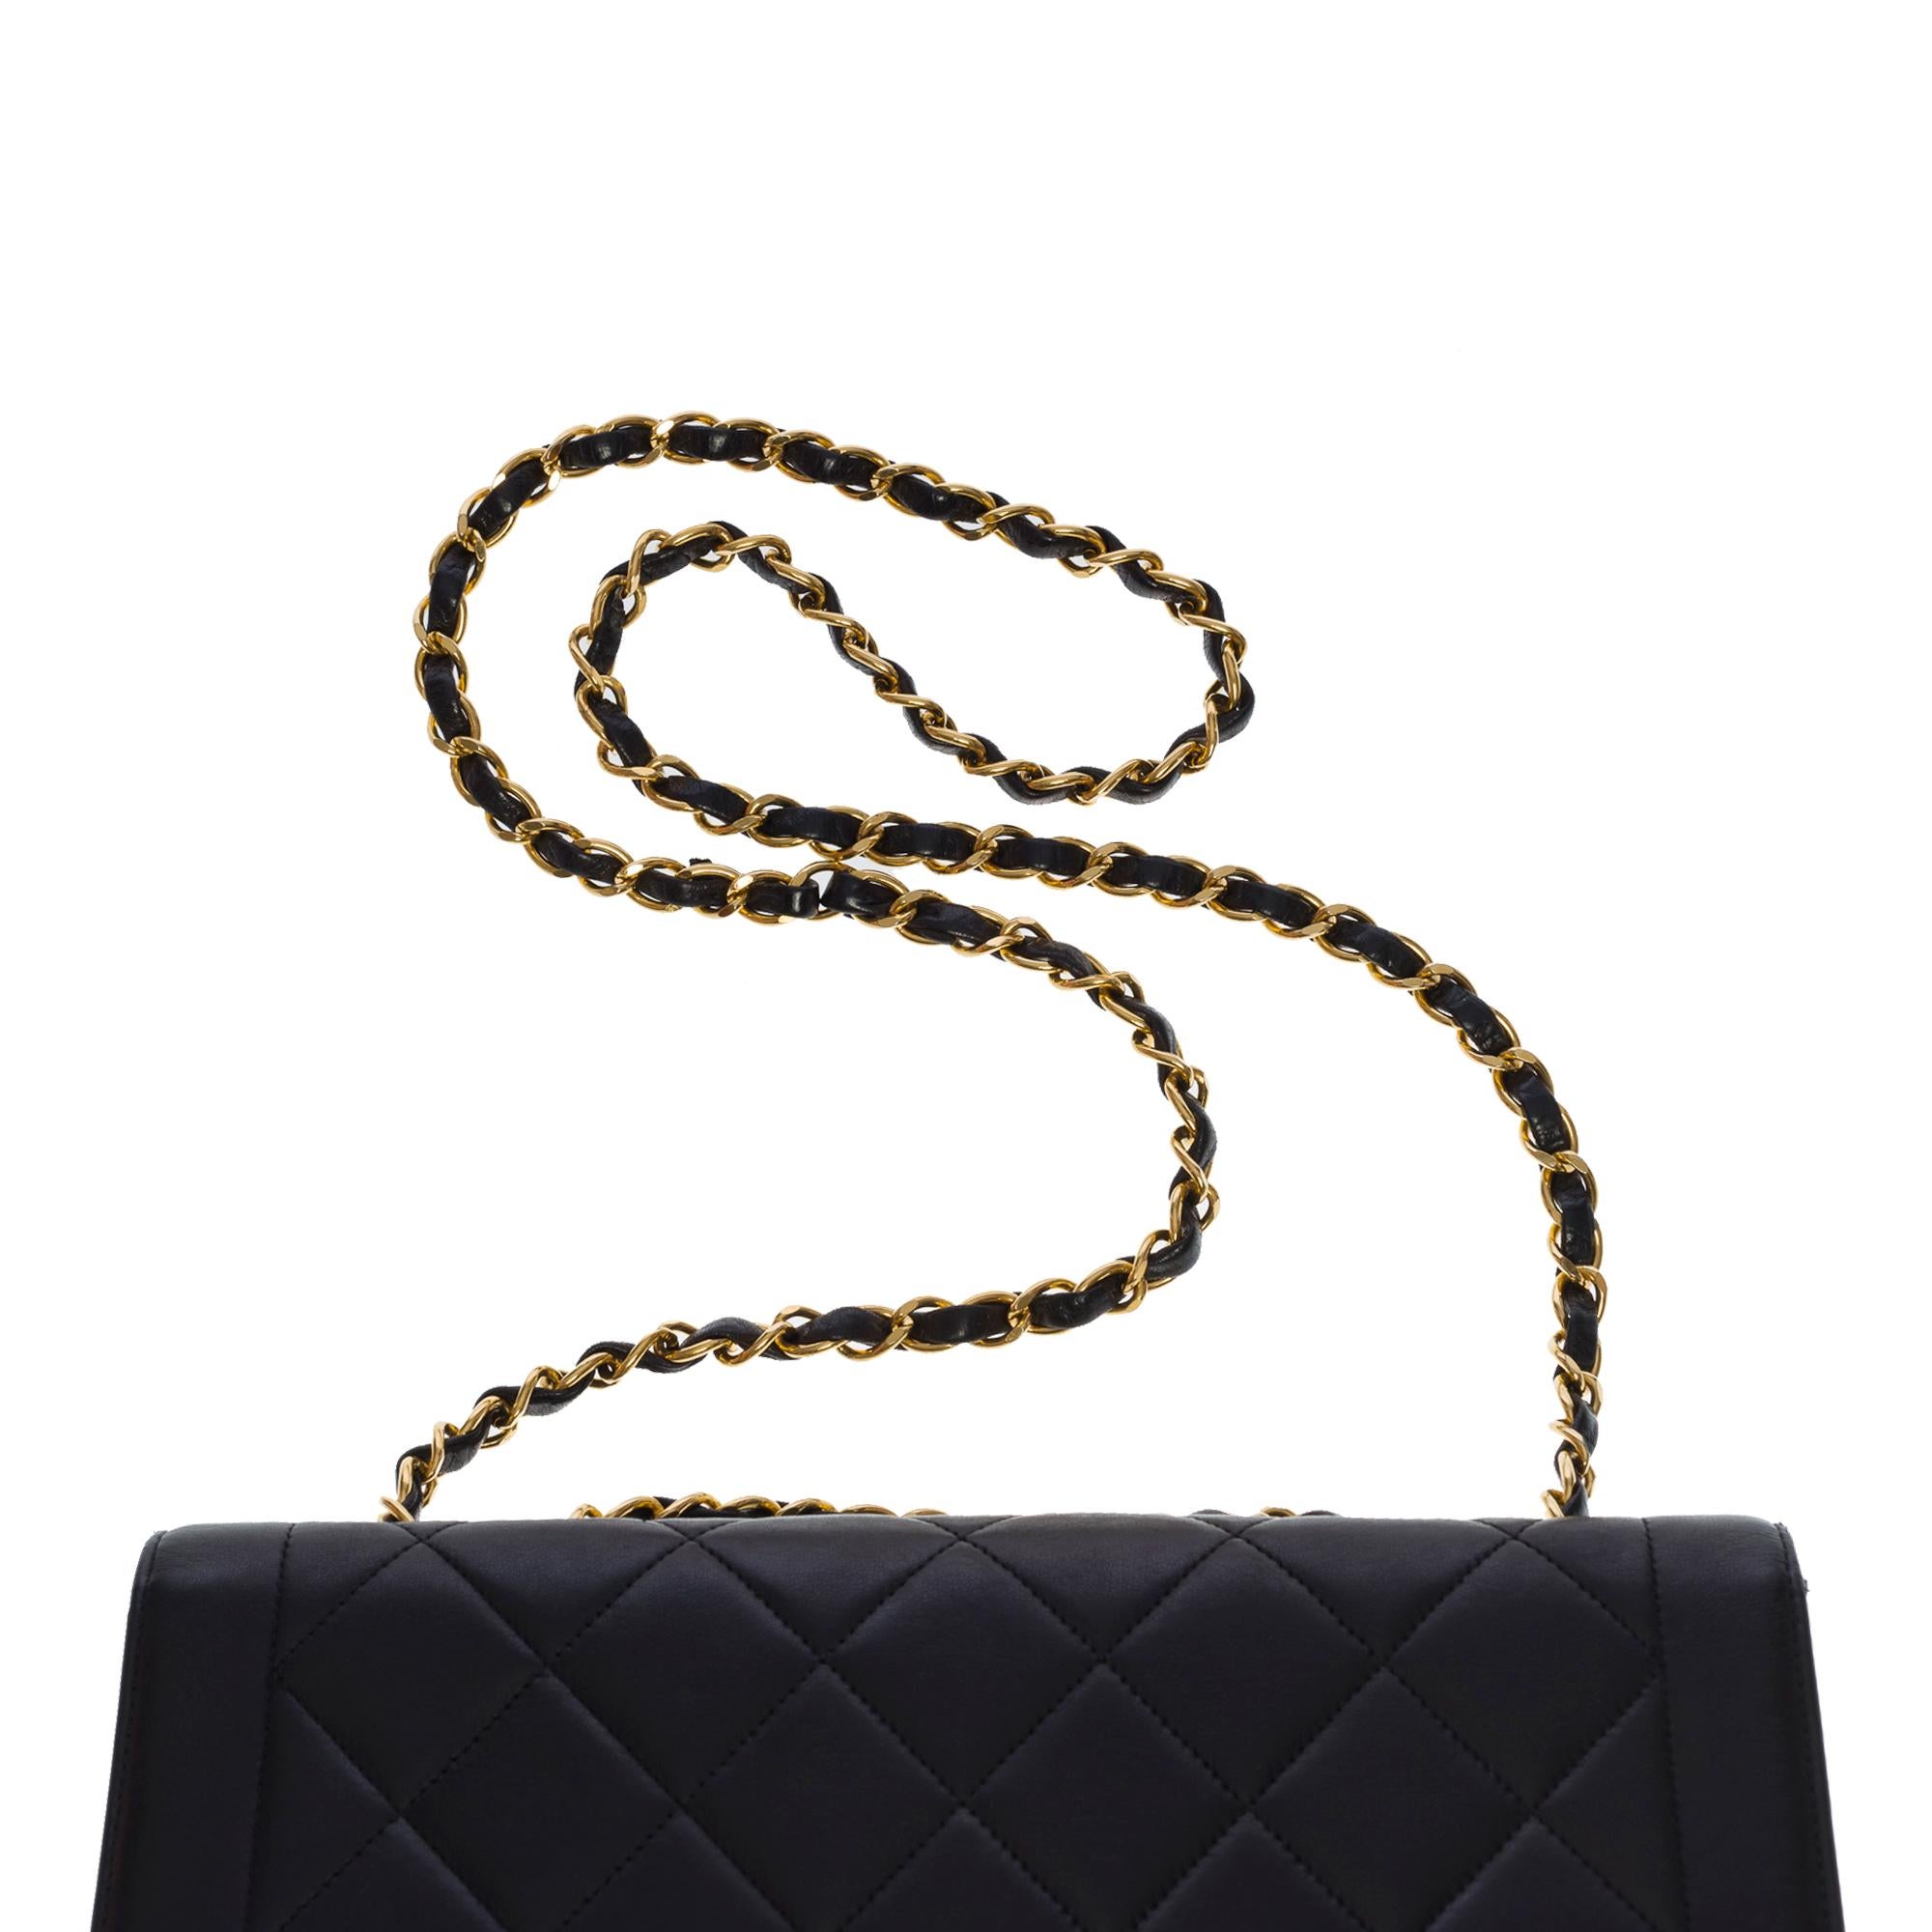 Chanel Timeless/Classic double Flap shoulder bag in black quilted lambskin, GHW 4